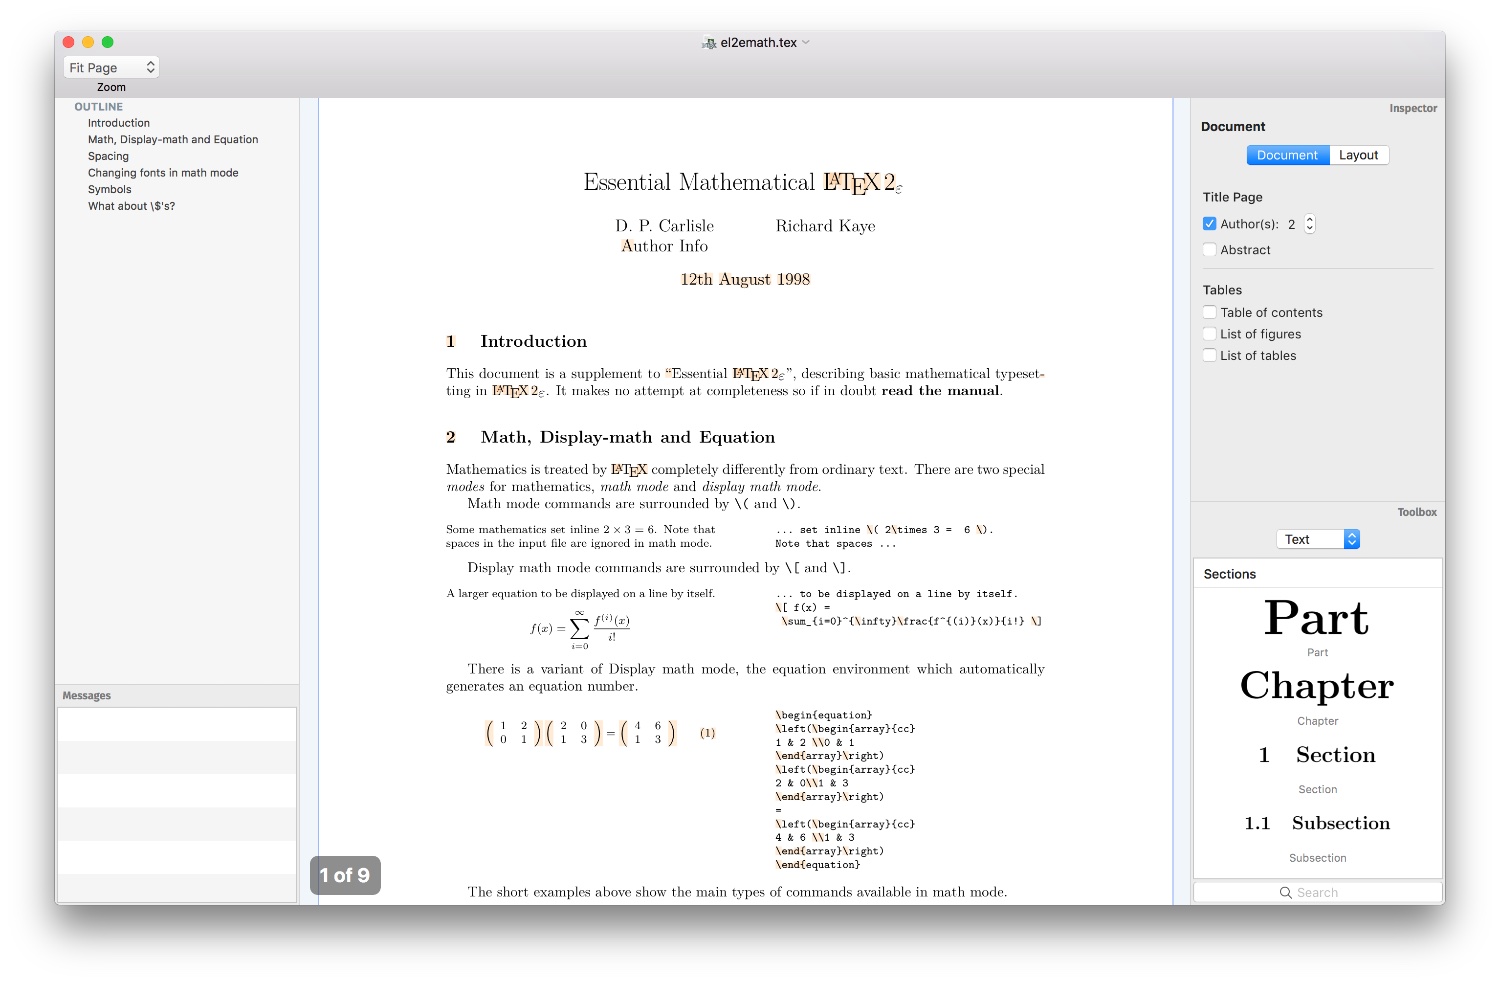 Compositor 1.2 for macOS adds support for LaTeX 3